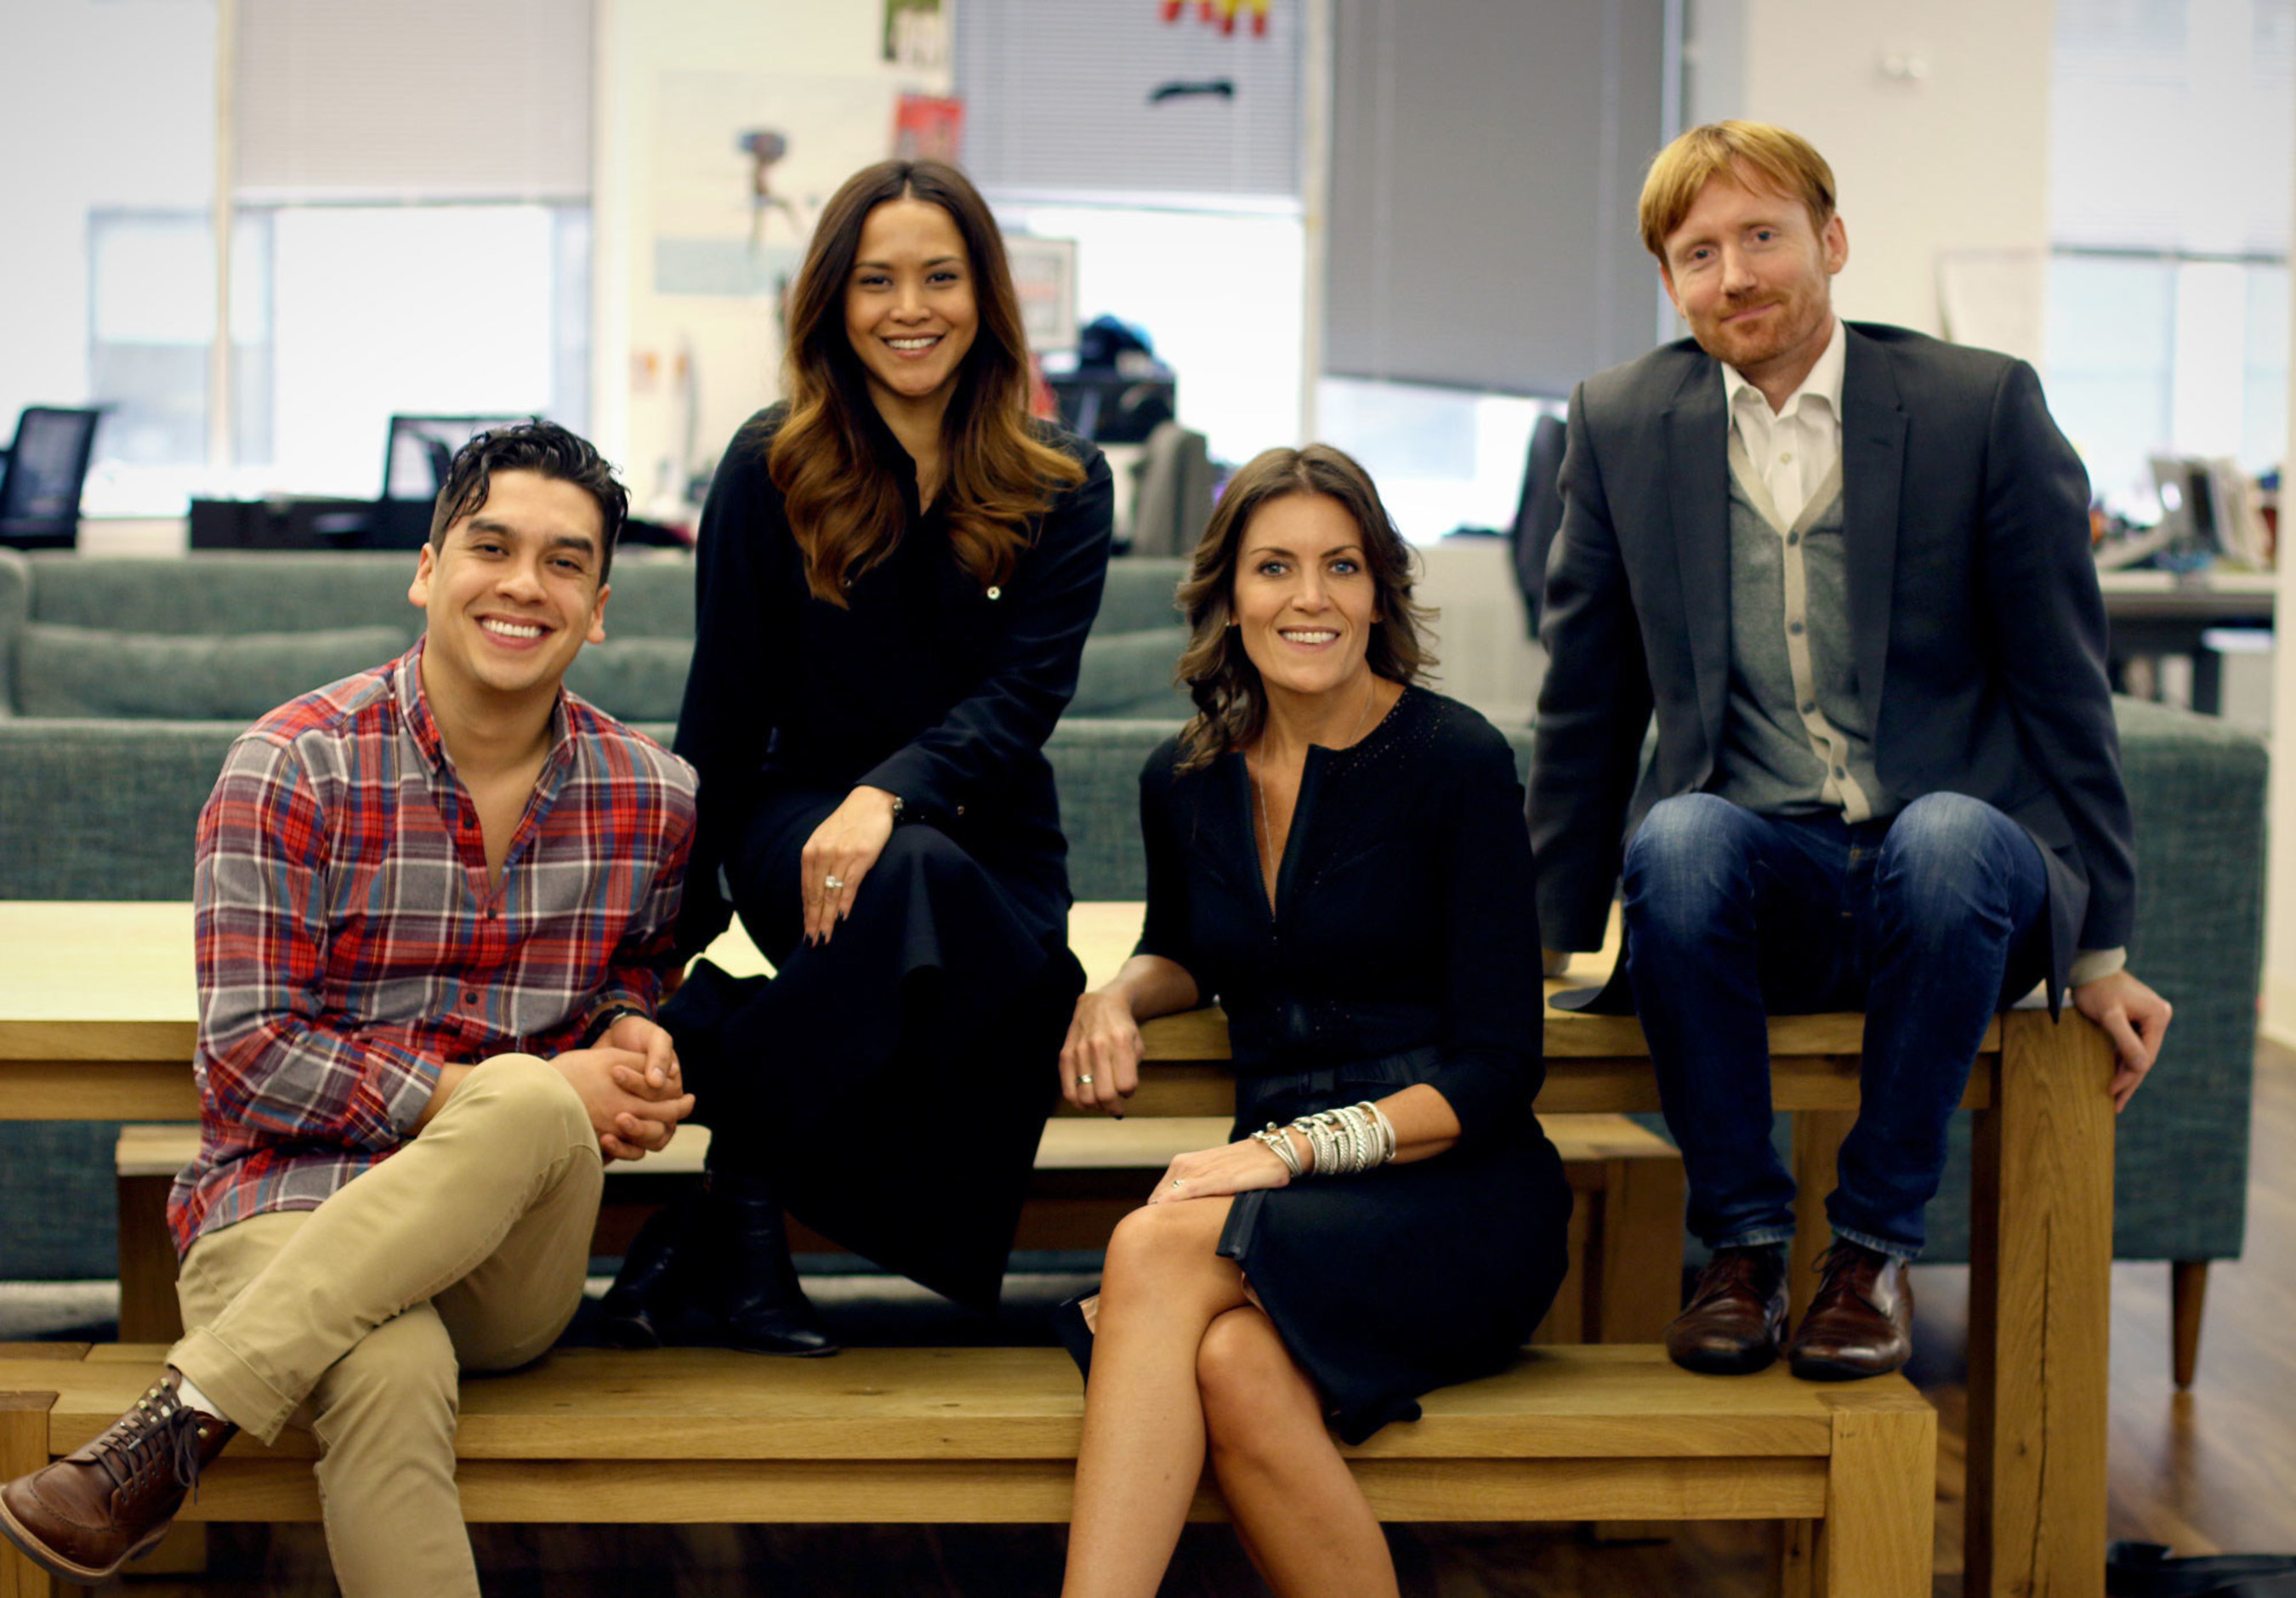 Emilio Rosas, Account Director at DDB New York; Melissa Martinez, CMO of DDB New York; Wendy Clark, CEO of DDB North America; Chris Brown, President and CEO of DDB New York